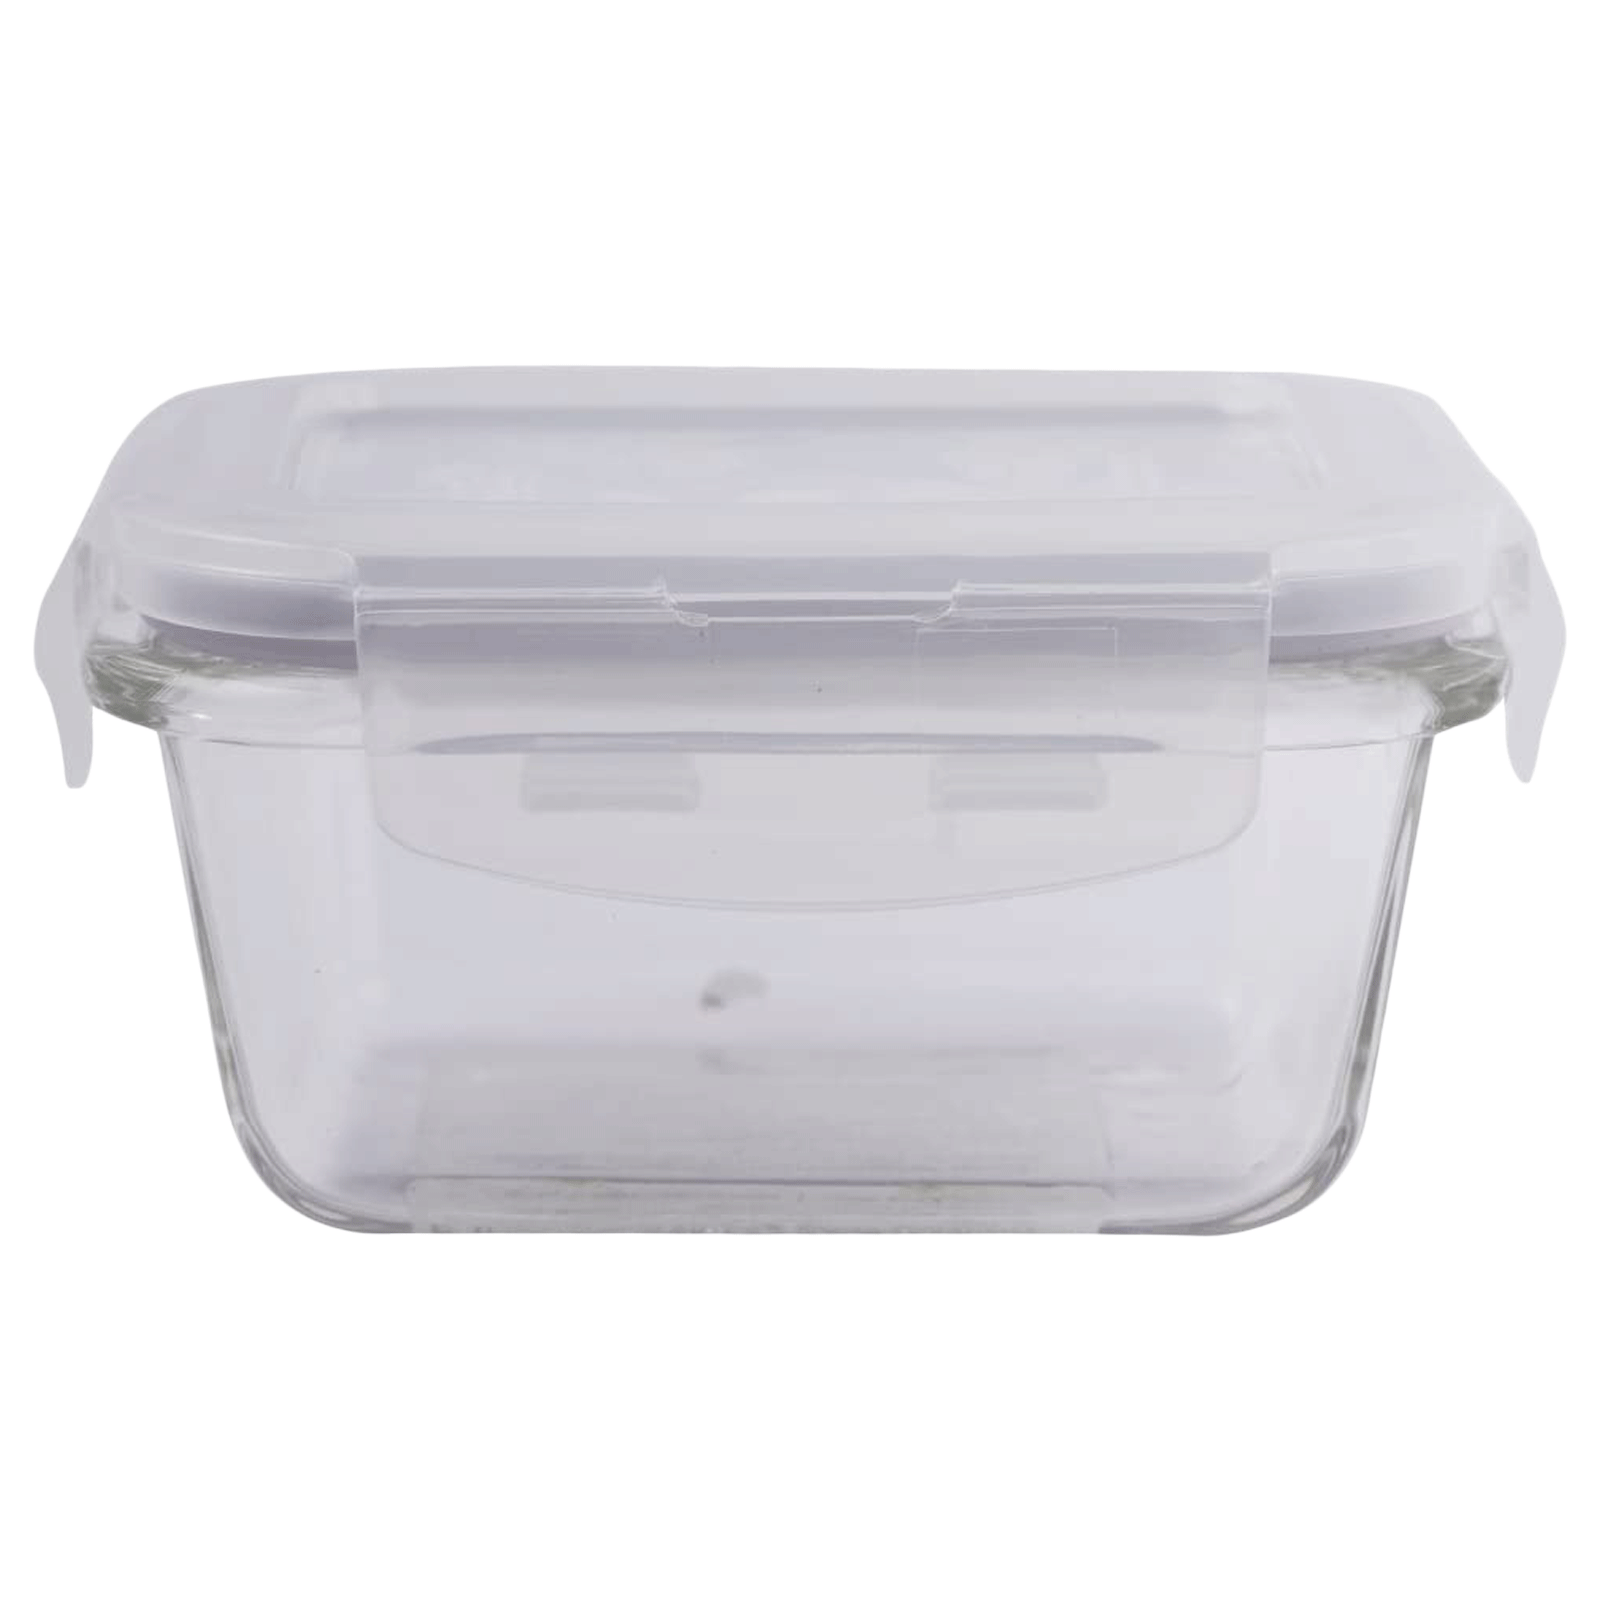 Lock & Lock Ovenglass 160 ml Square Glass Storage Container (Heat Resistant, LLG414, Transparent)_1